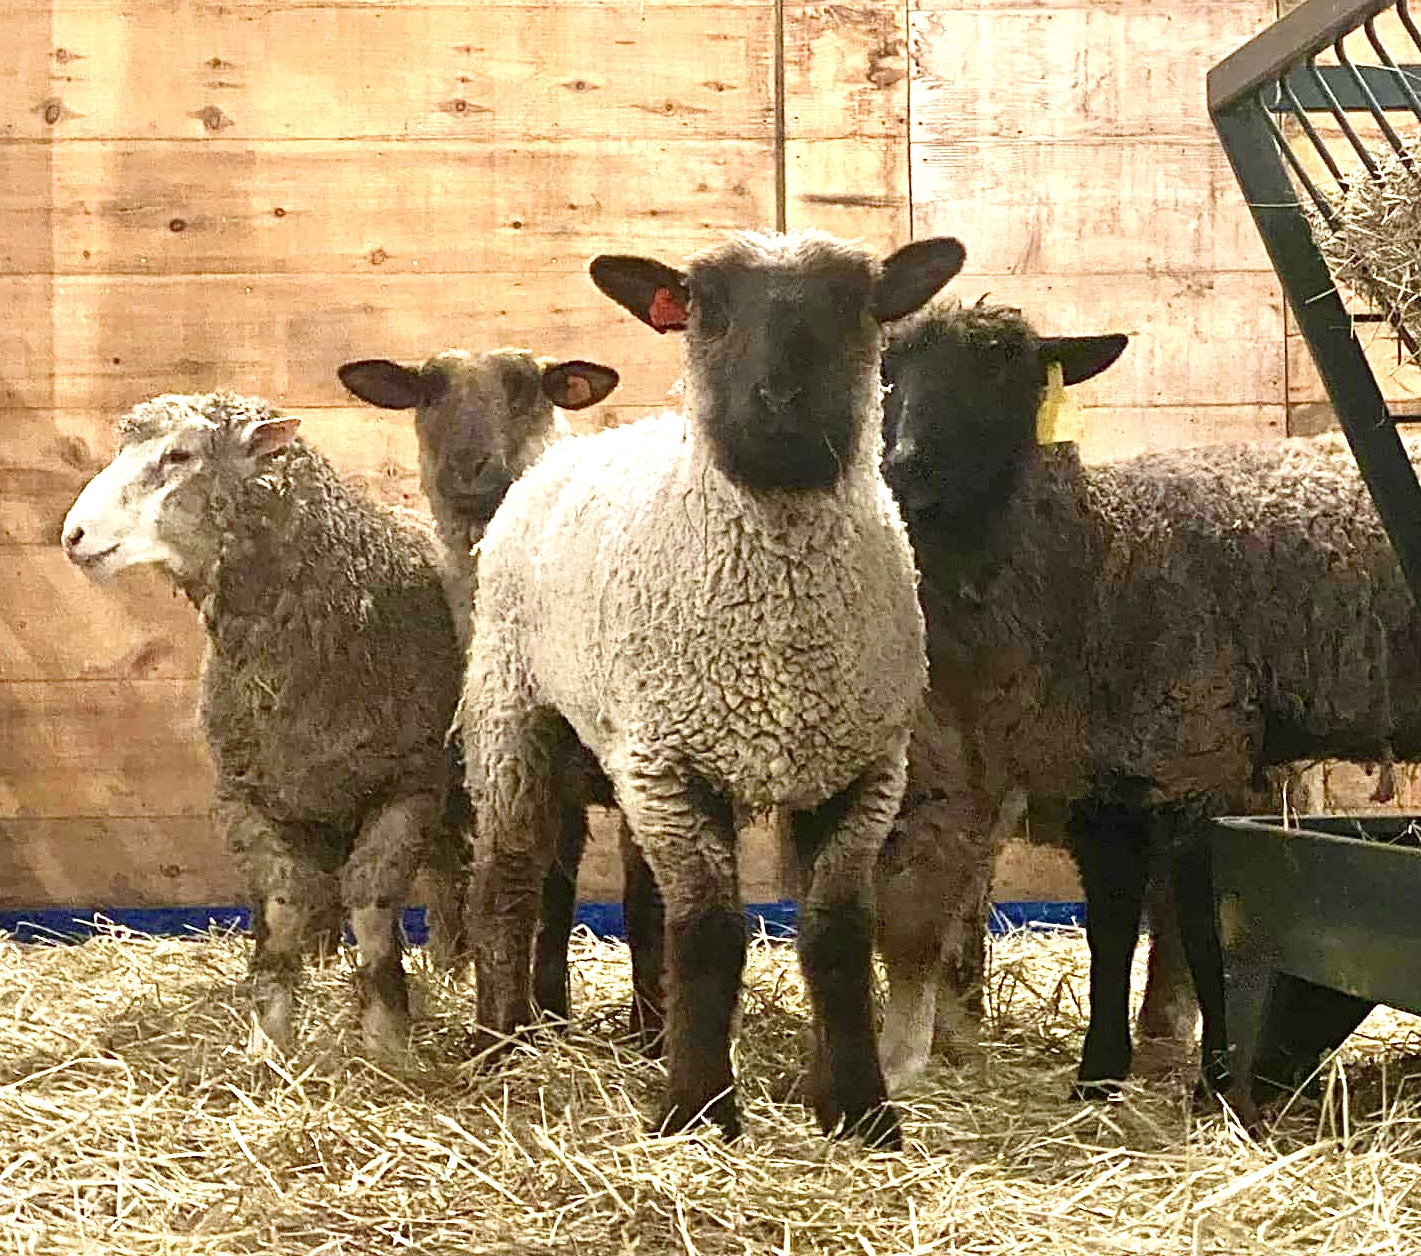 WAN Talks With Mike Stura, Founder Of Skylands Animal Sanctuary About Rescuing 7 Sheep Who Escaped Slaughter In New Jersey